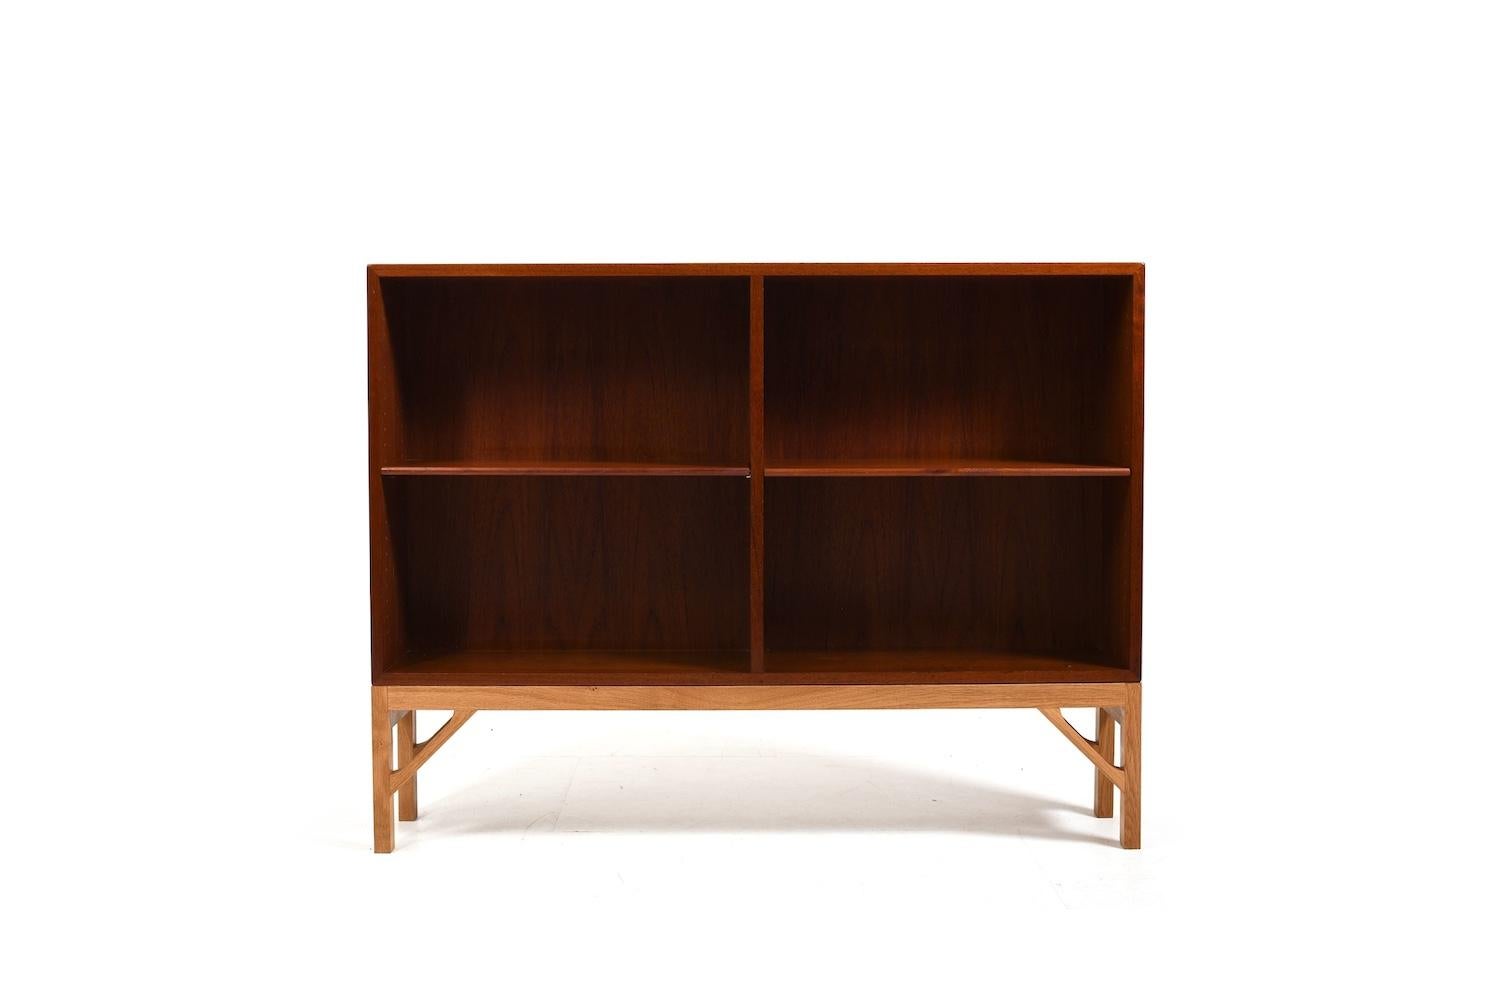 Book case,  model no.152 by Børge Mogensen for FDB Møbler. Teak shelve on solid oak base. He designed his China Series in 1960s. Produced i1960s.

Note: Please have a look on the matching cabinet and large book case in our collection.